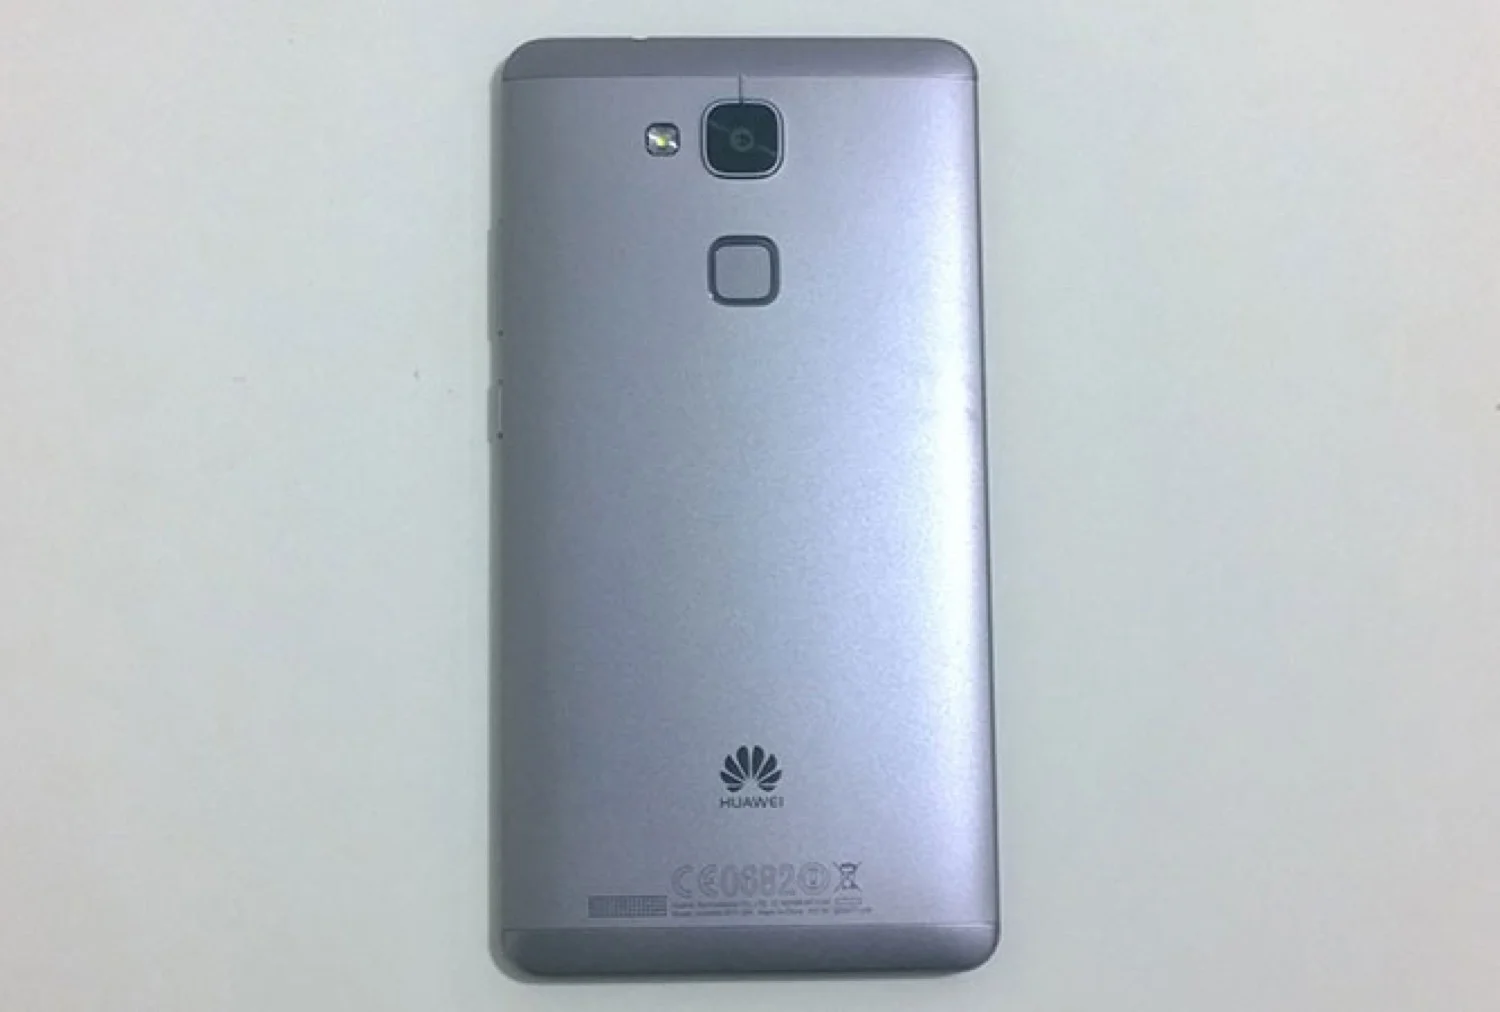 Review: Huawei Ascend Mate 7